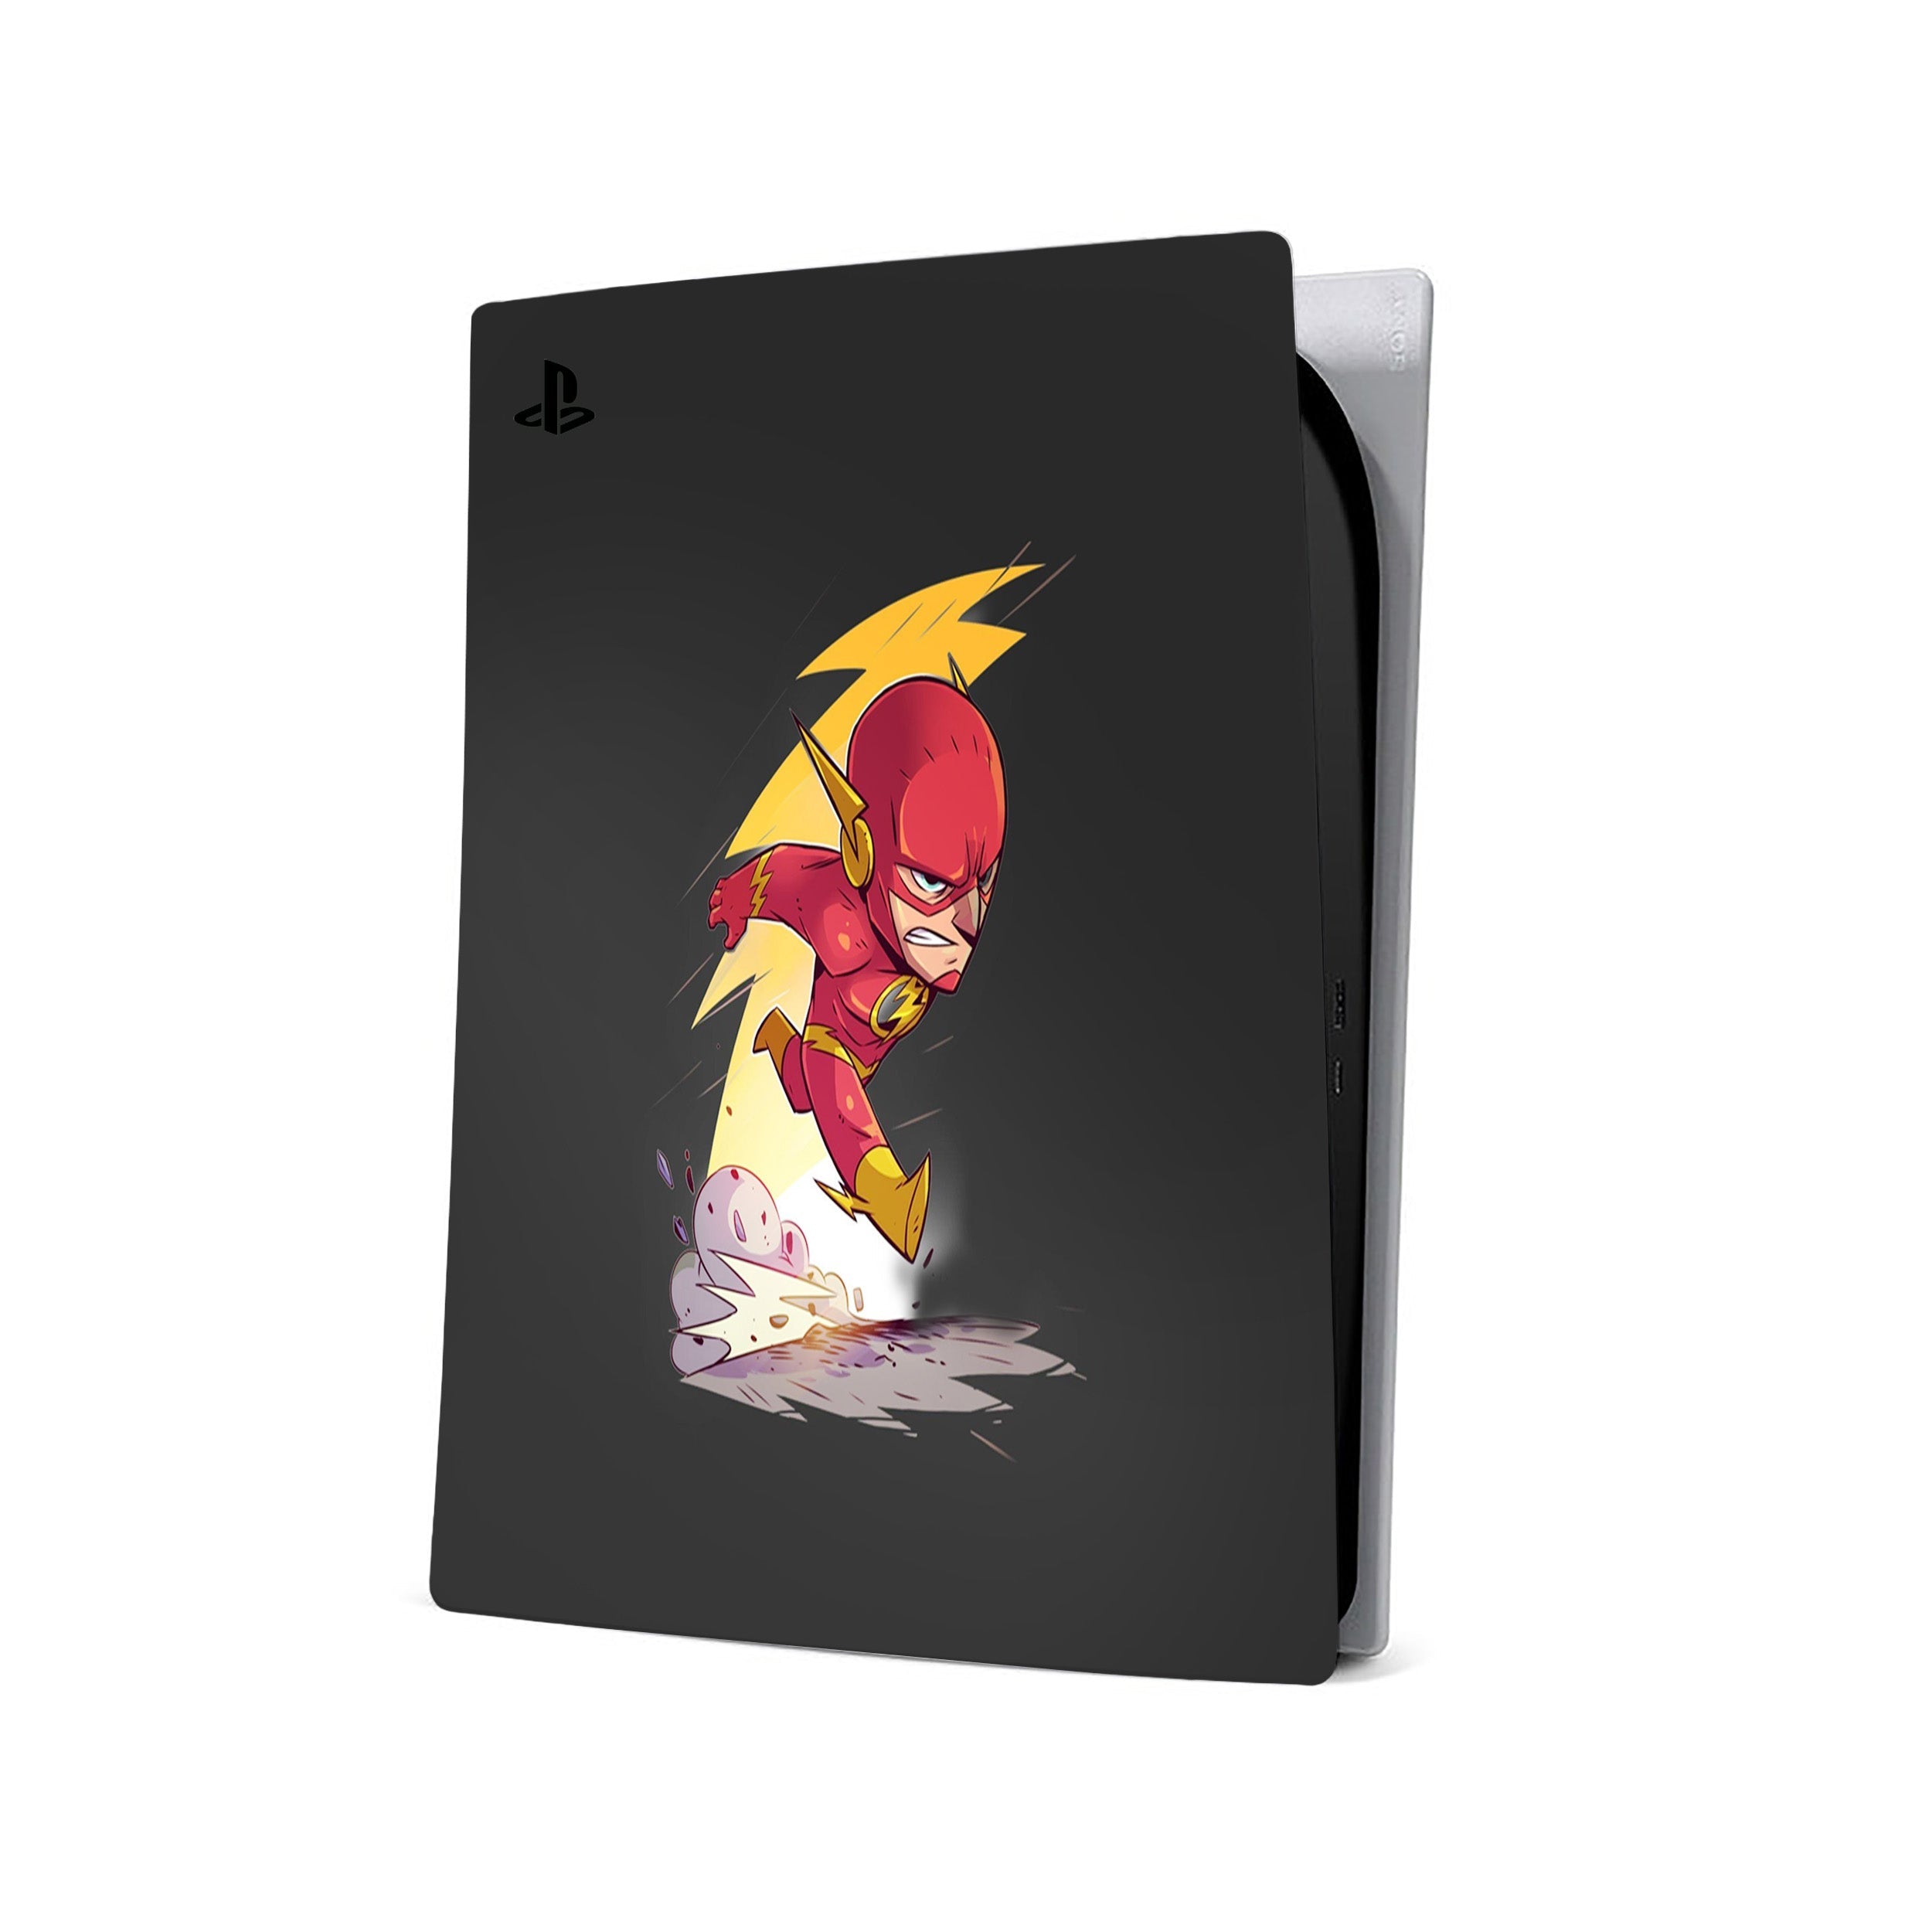 A video game skin featuring a Marvel Flash design for the PS5.